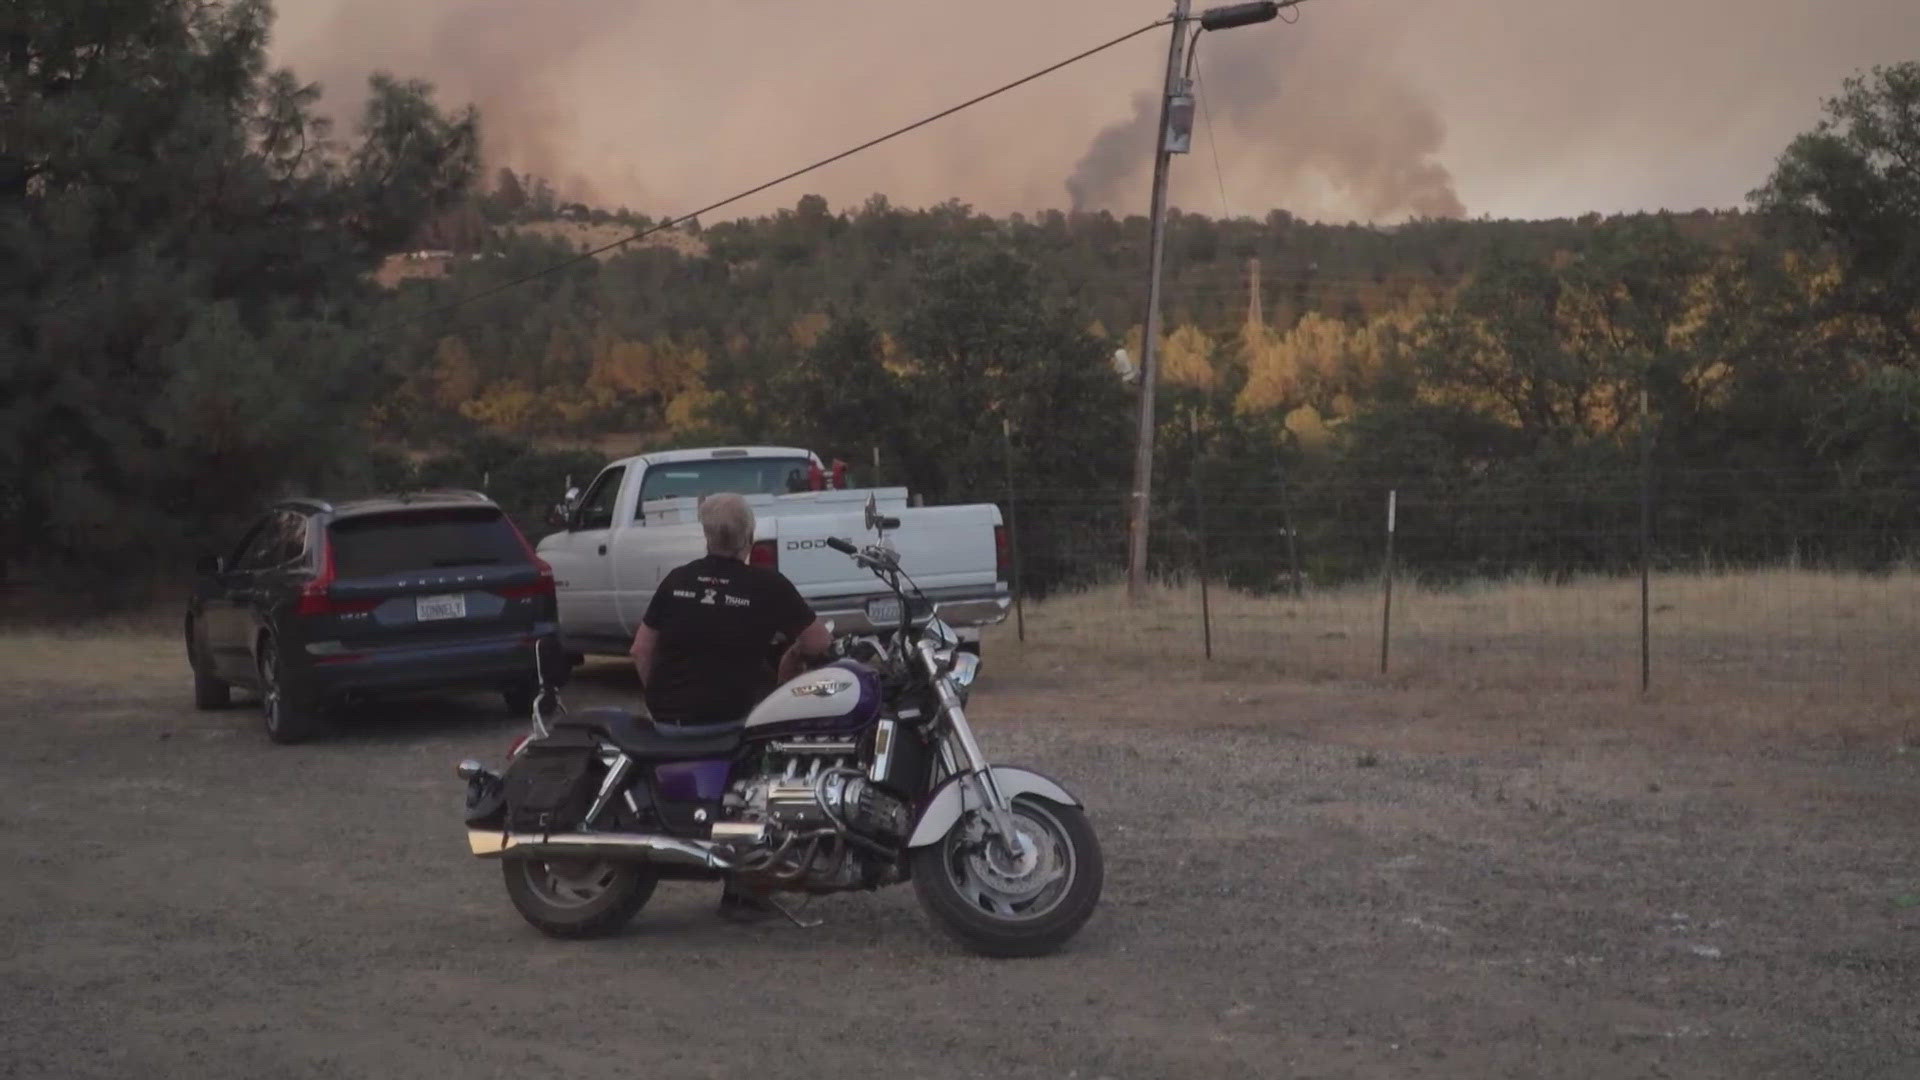 With smoke visible for miles, neighbors could only watch and wait.